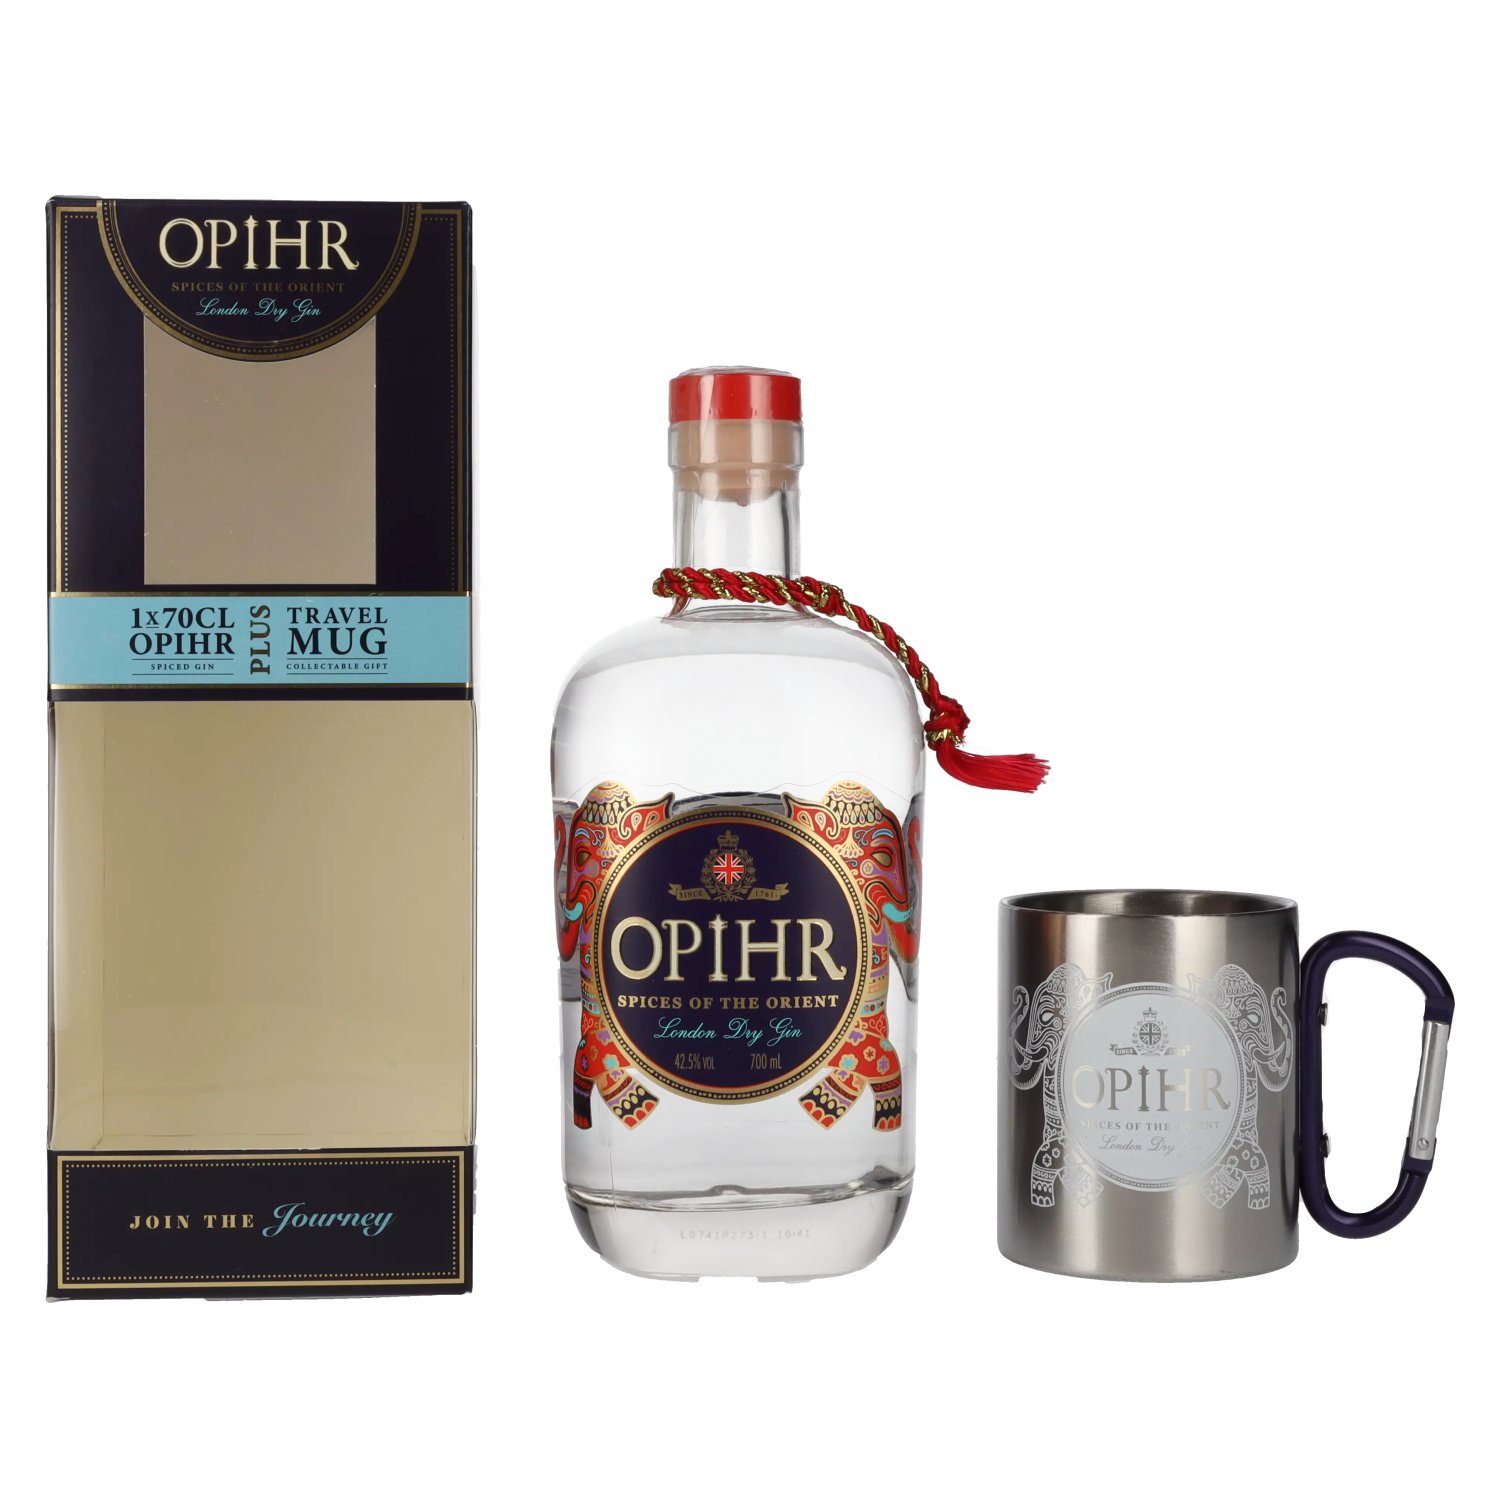 SPICED Travel 42,5% Vol. Mug ORIENTAL in Giftbox Gin Opihr 0,7l Dry London with